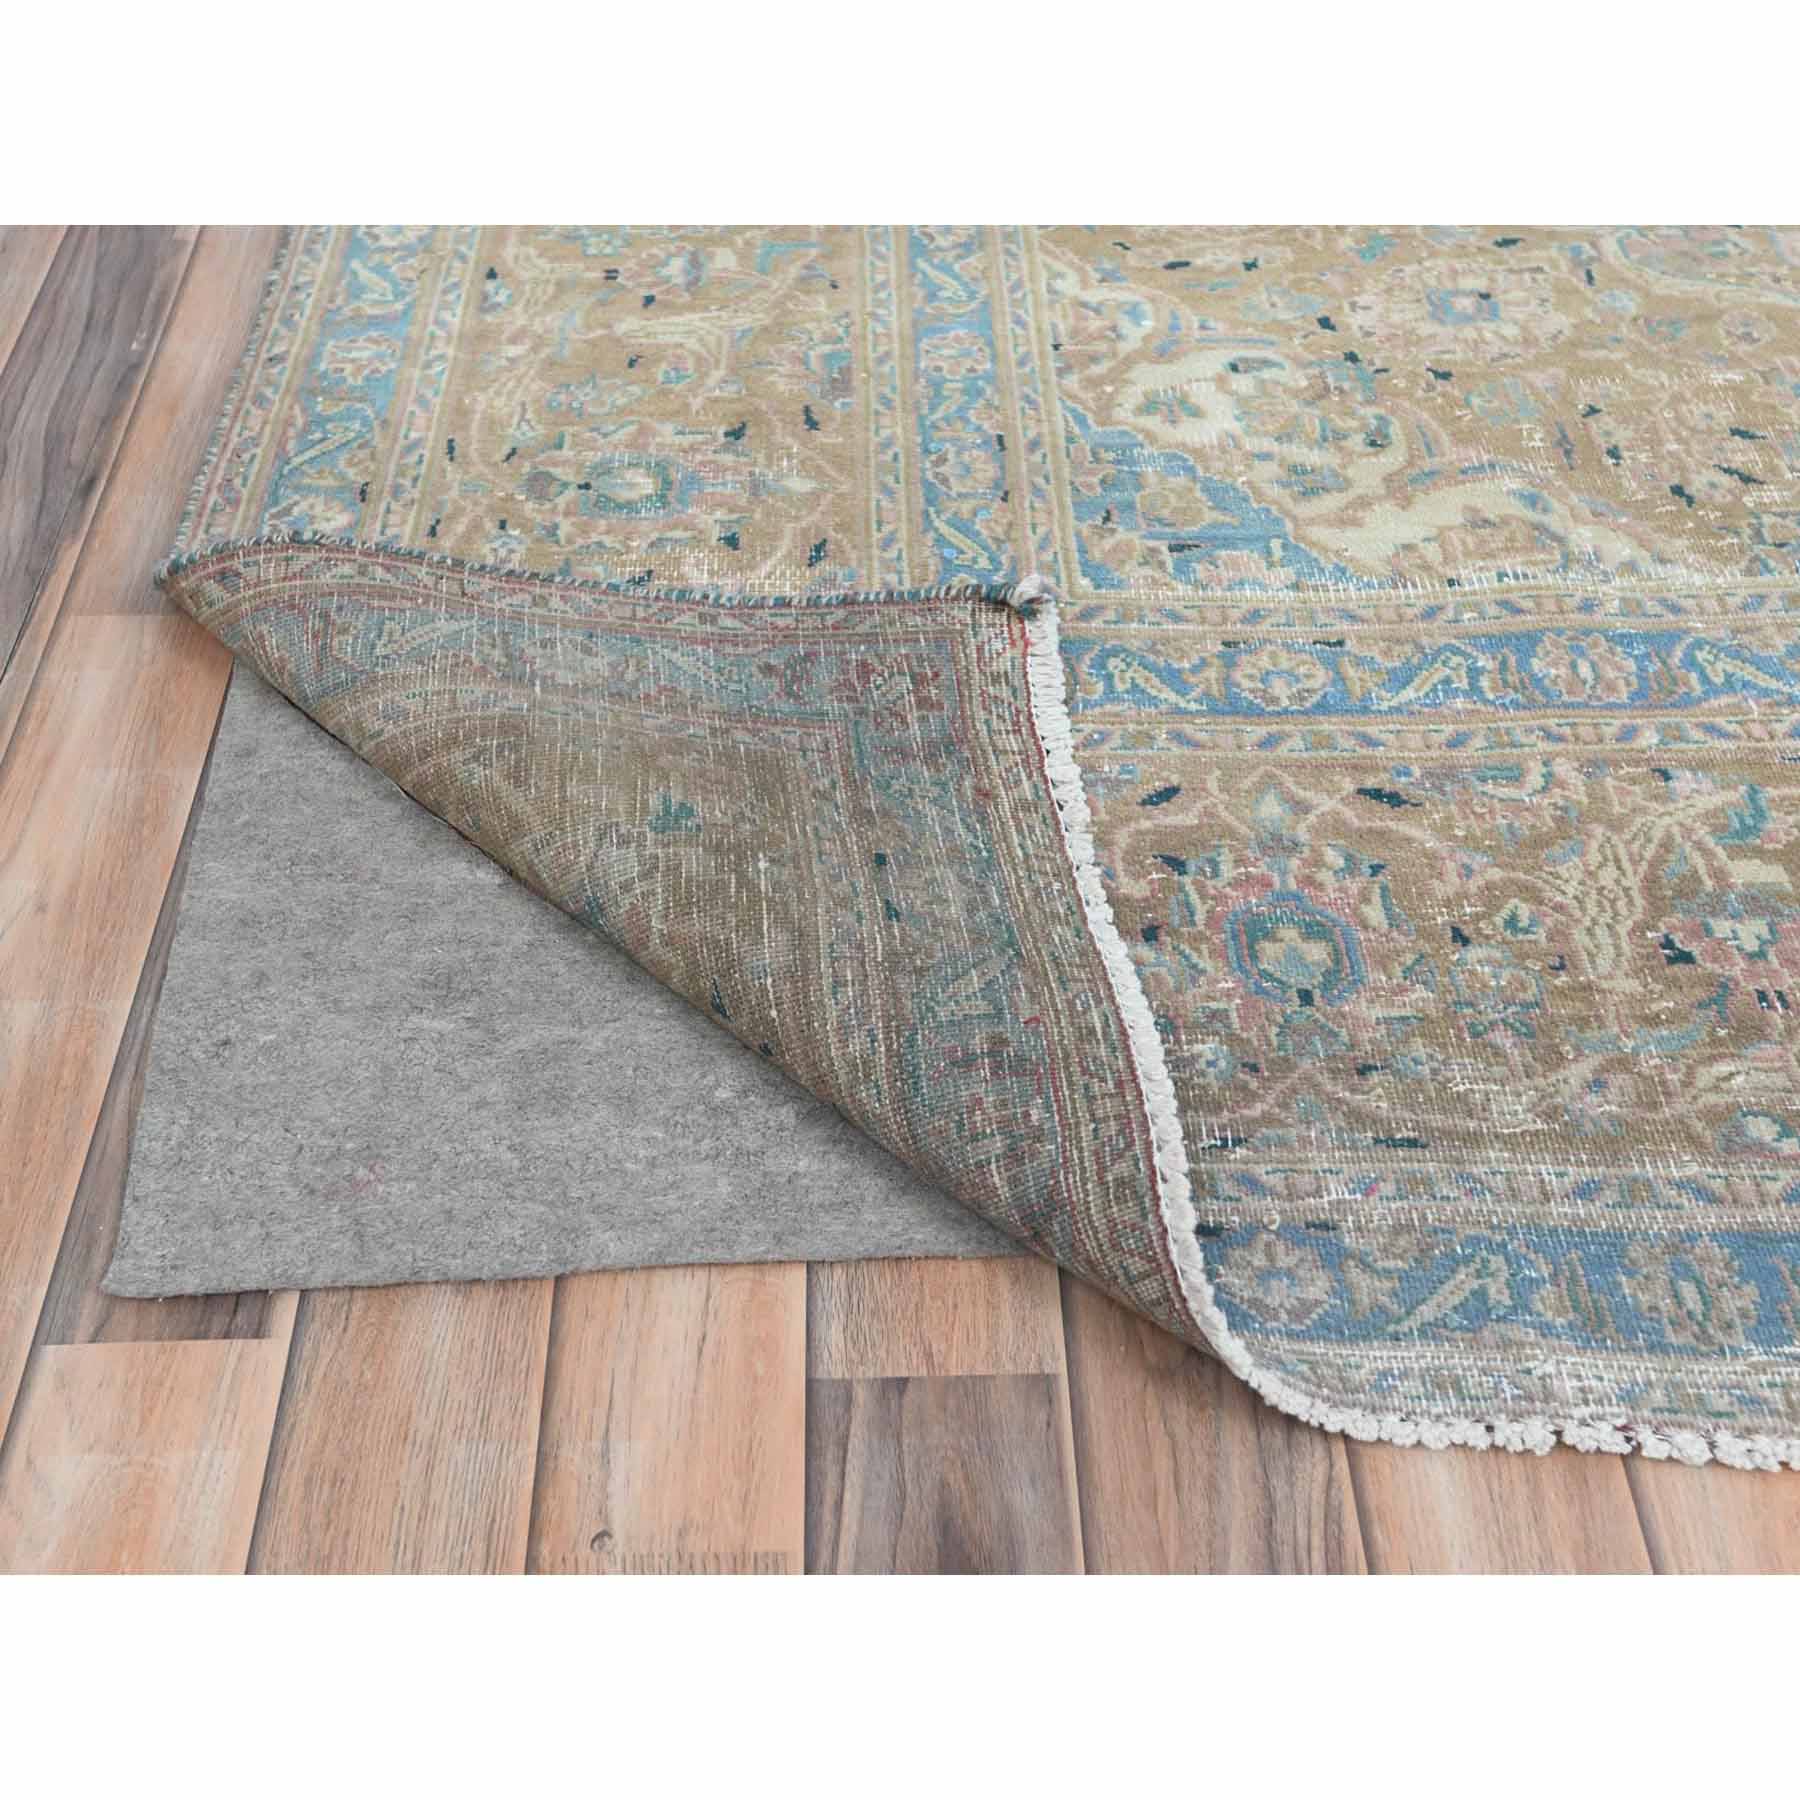 Overdyed-Vintage-Hand-Knotted-Rug-408515